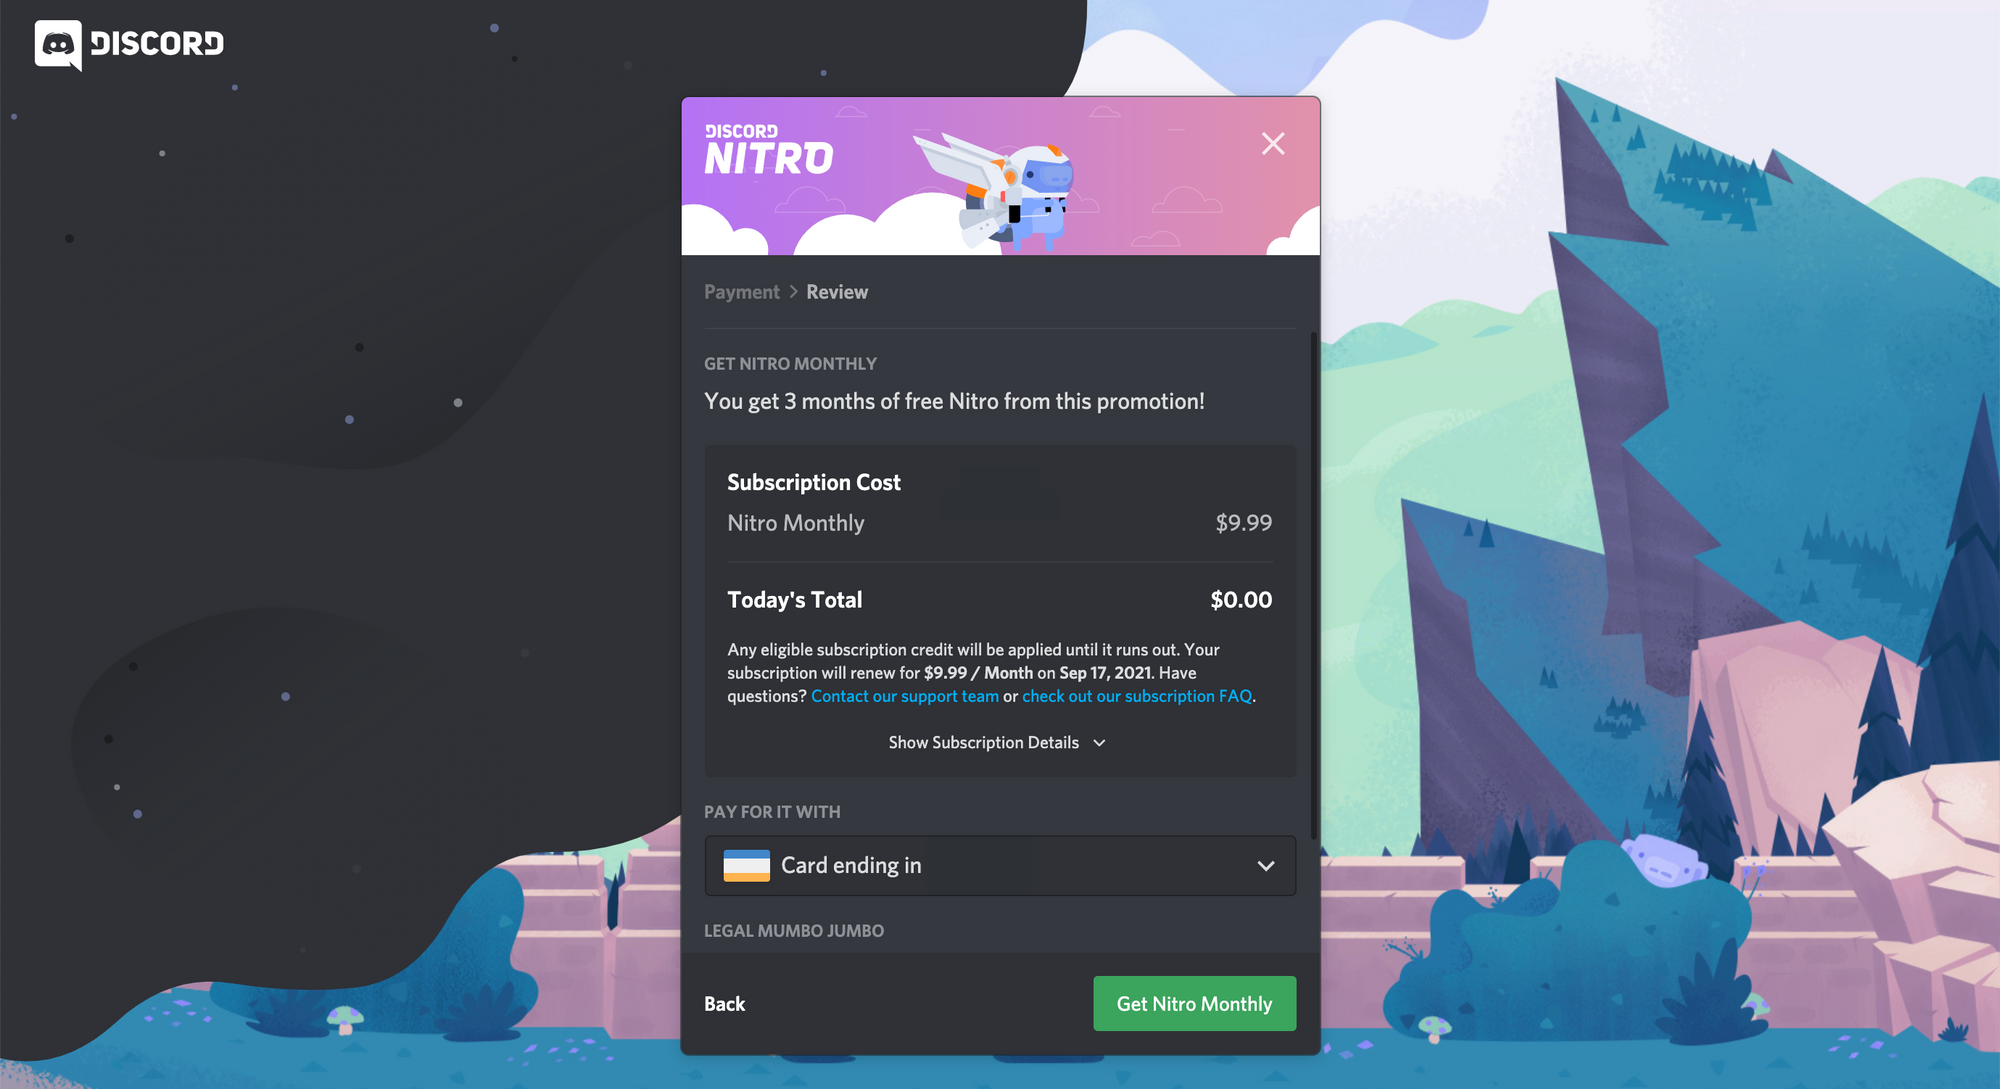 Epic Games Store] Discord Nitro Get 3 Months of Discord Nitro, free for new  Nitro users. Offer ends June 24, 2021 at 11am EDT.